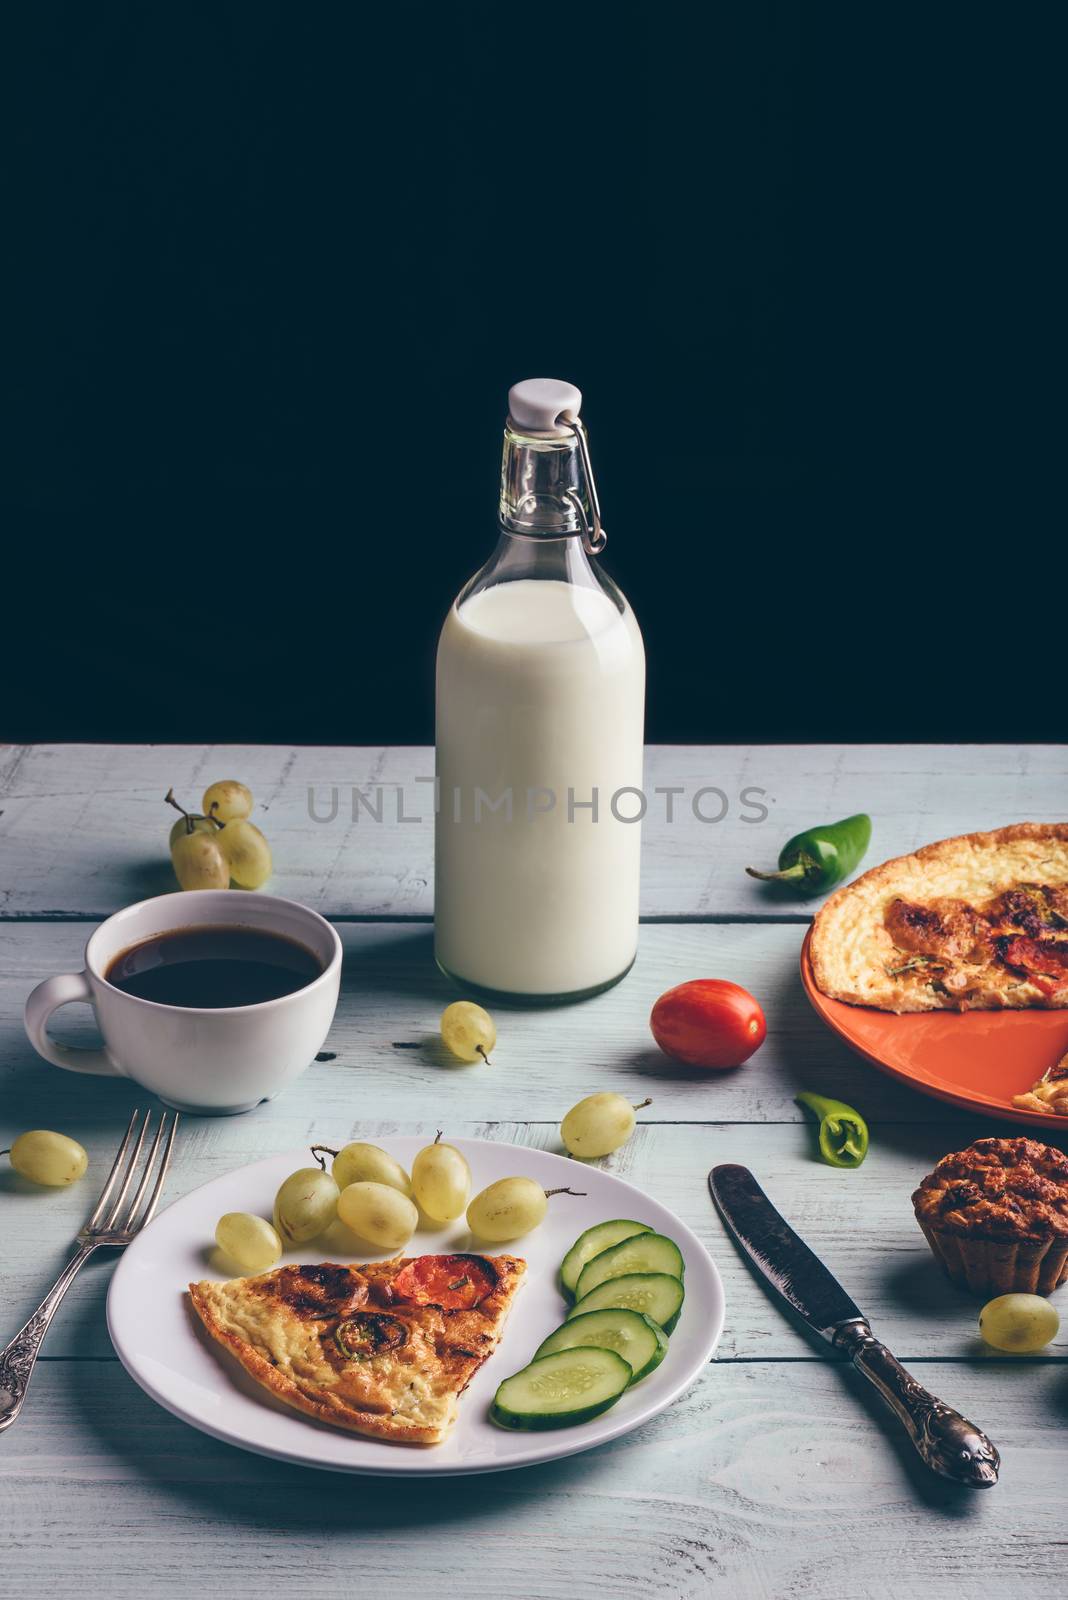 Frittata and fruits, vegetables, bottle of milk, cup of coffee. by Seva_blsv